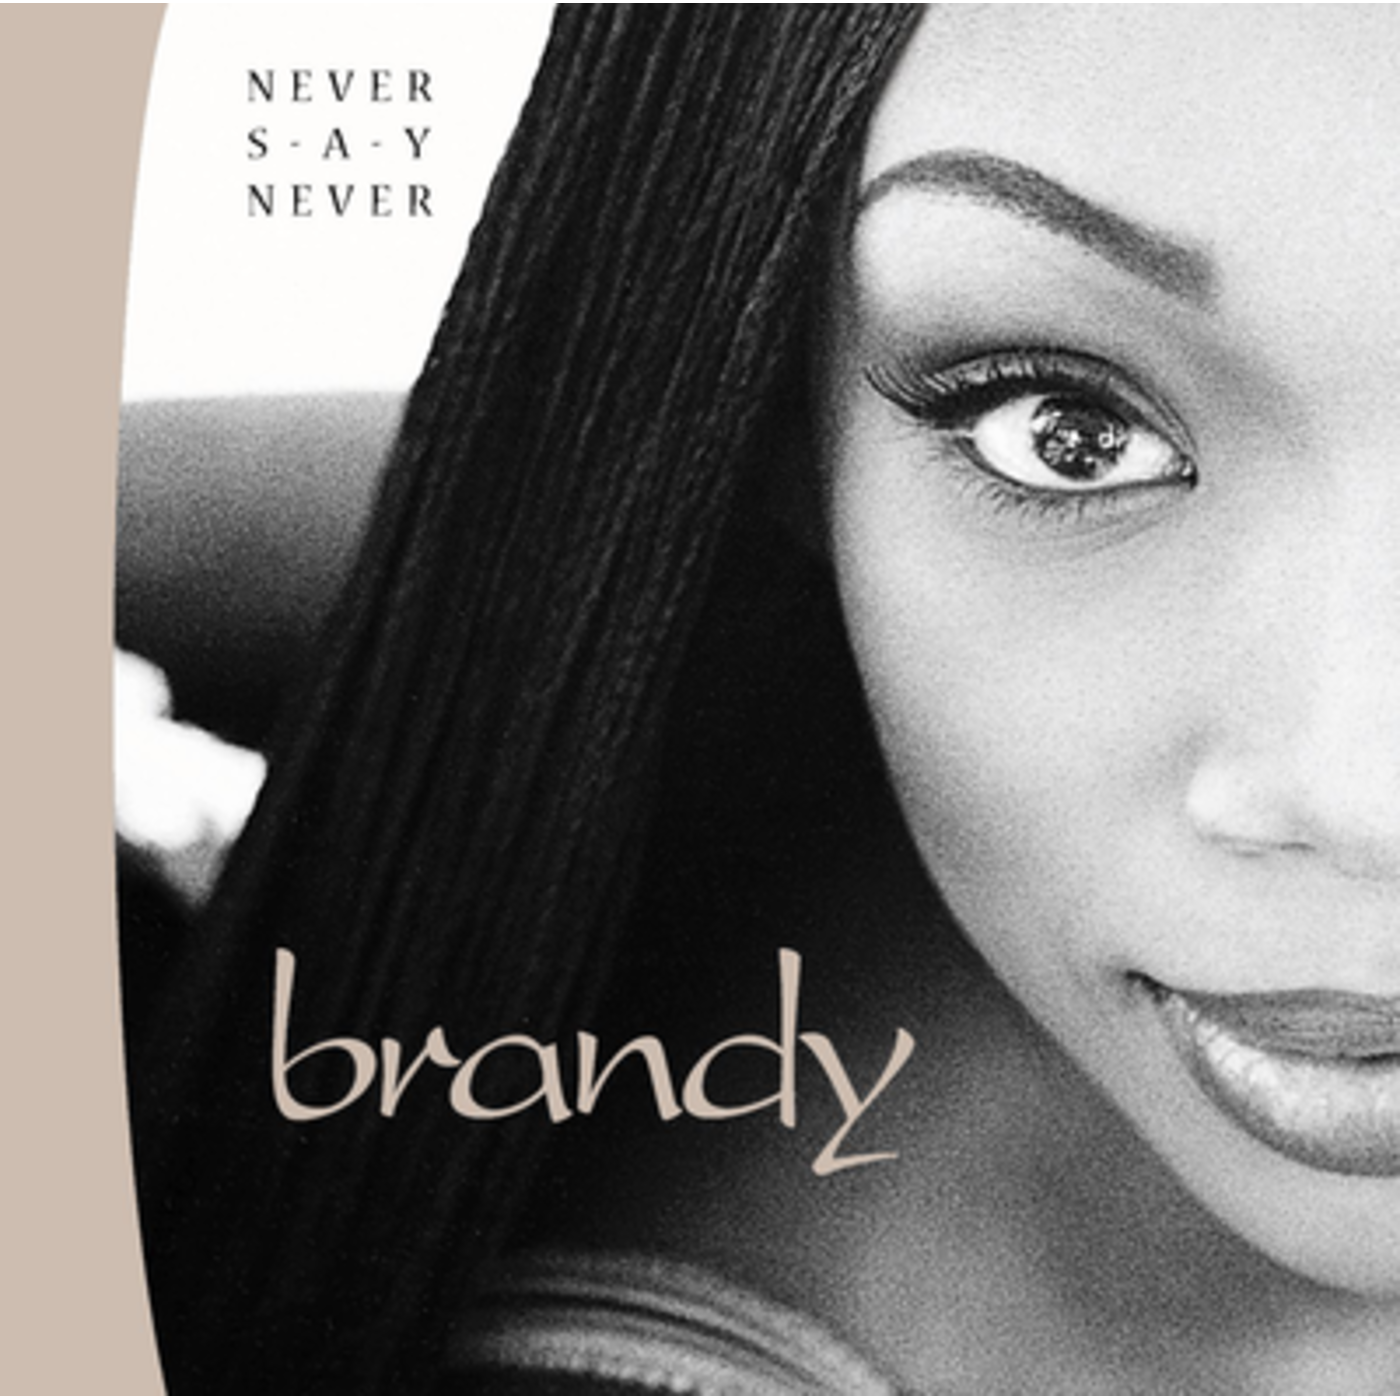 When you touch me brandy mp3 download before happiness pdf download